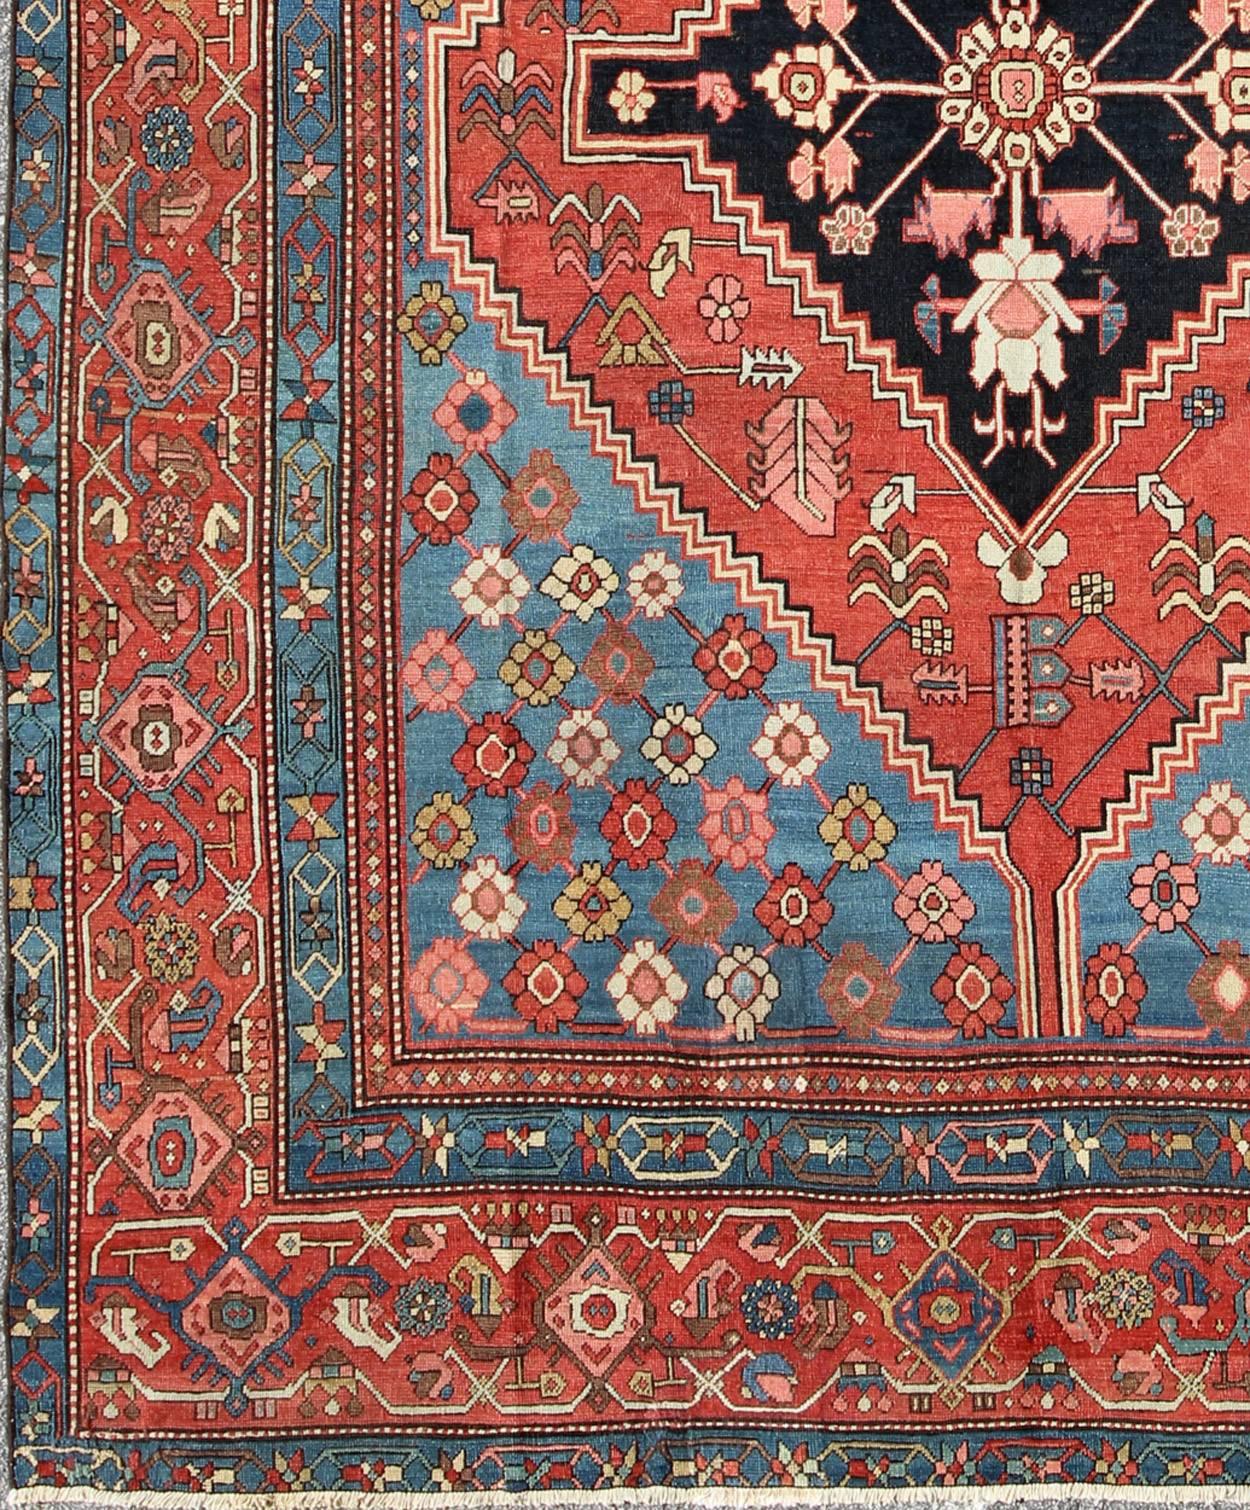 Antique Persian Bakhshaish carpet with a unique geometric medallion and design, rug / 10-KE-319, late 19th century Persian Bakhshaish, Antique Serapi.
Crafted in northwest Persia of Azerbaijan district, this superb antique Bakshaish rug contains